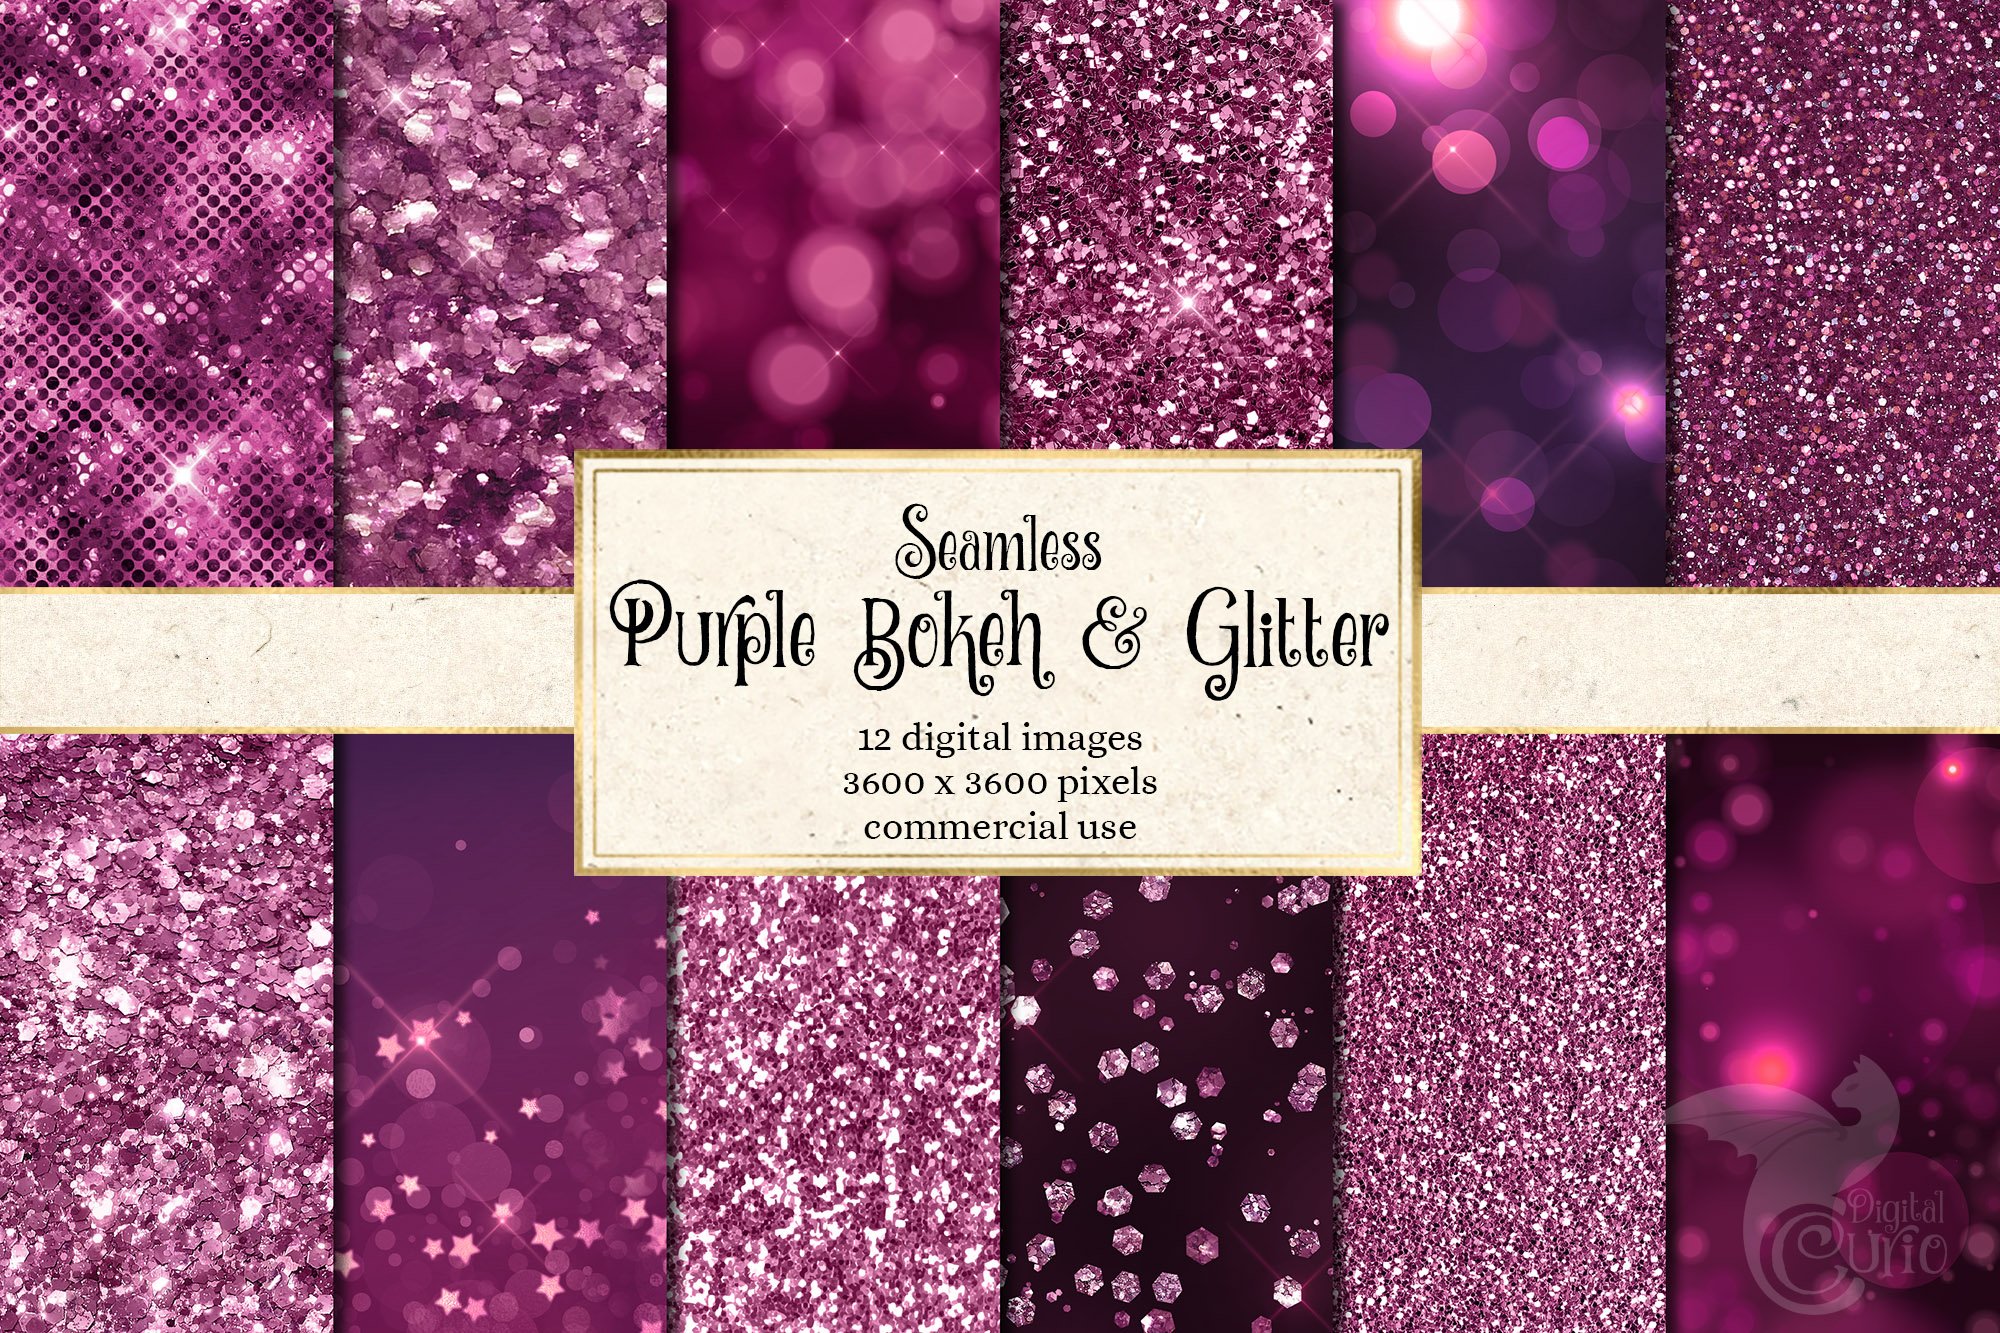 Purple Bokeh and Glitter Textures cover image.